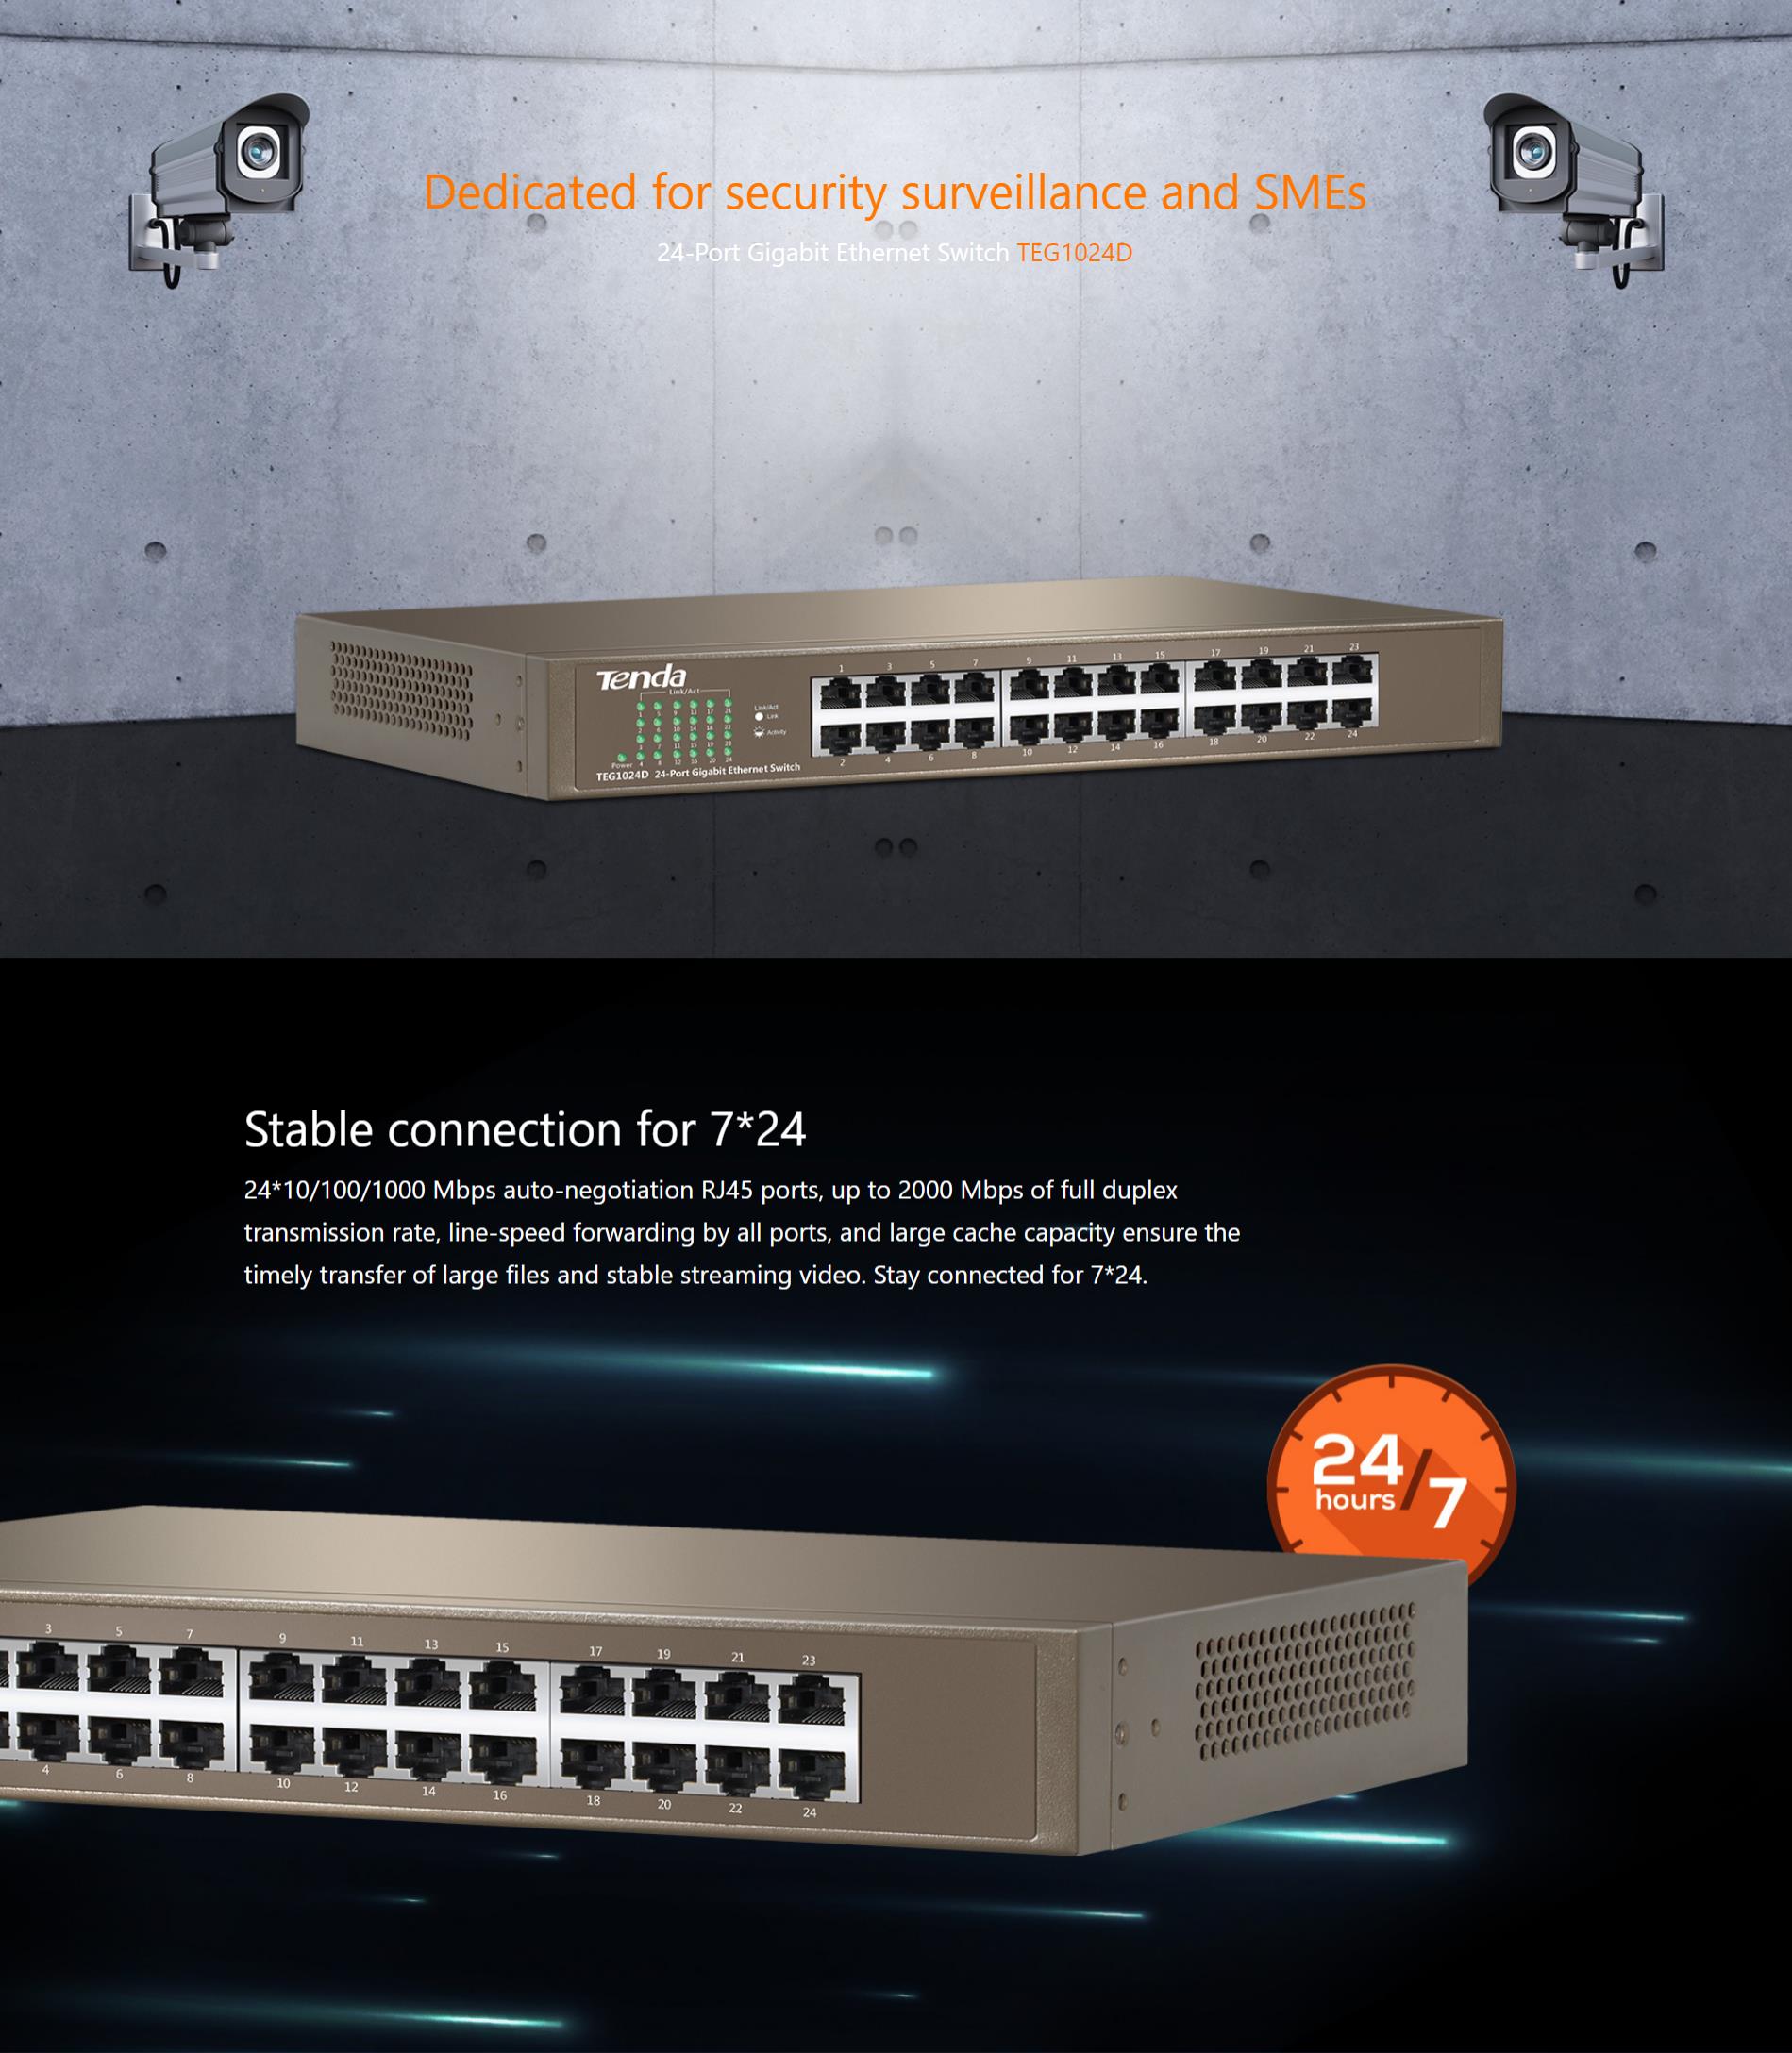 A large marketing image providing additional information about the product Tenda TEG1024D 24-Port Gigabit Ethernet Switch - Additional alt info not provided